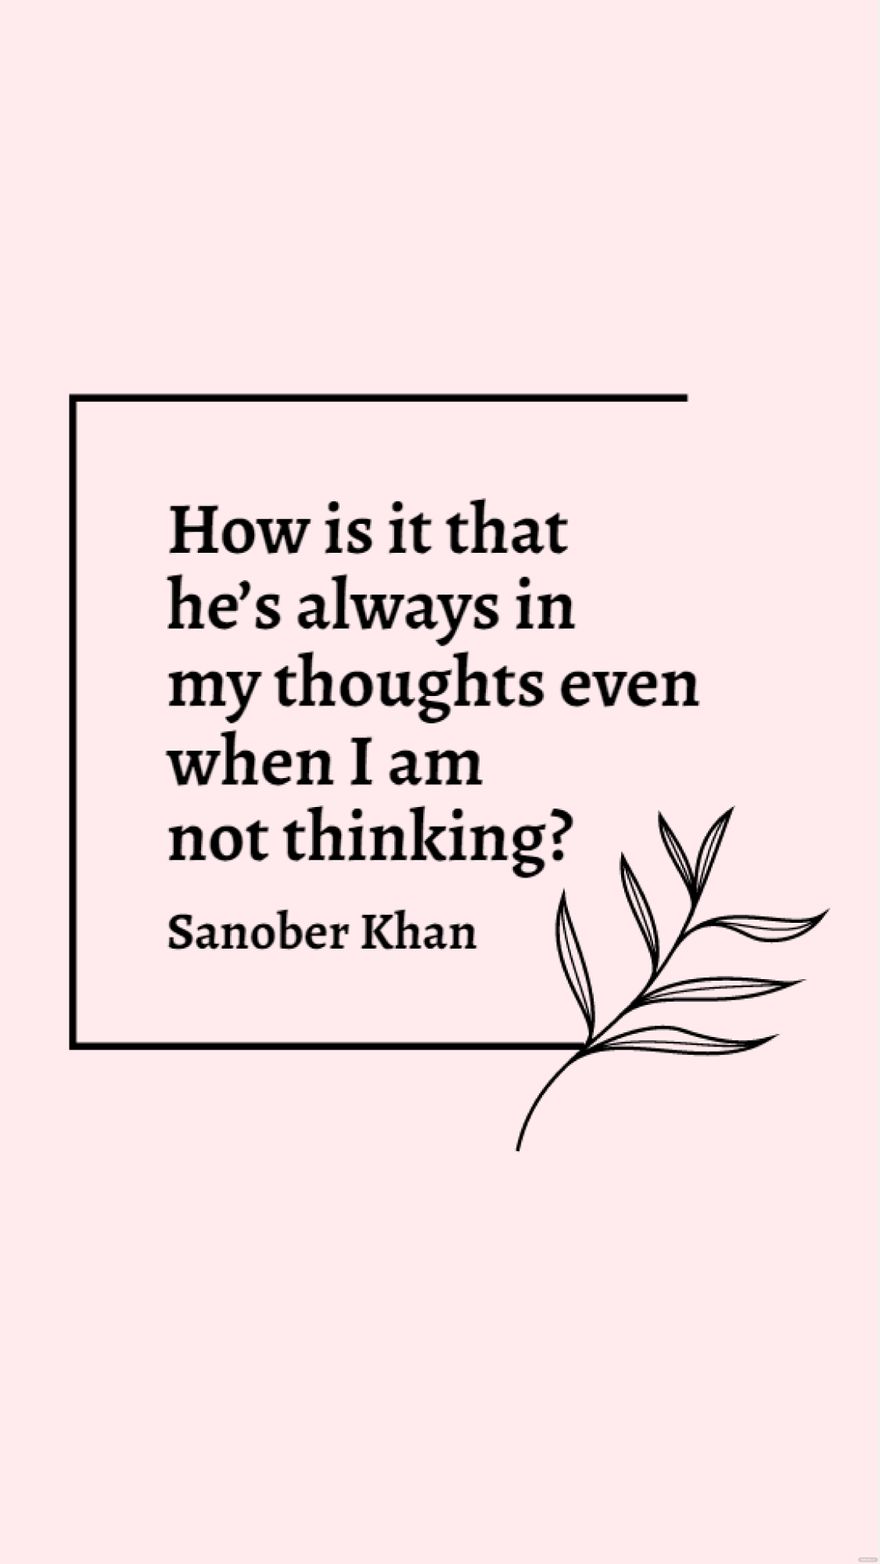 Free Sanober Khan - How is it that he’s always in my thoughts even when I am not thinking? in JPG